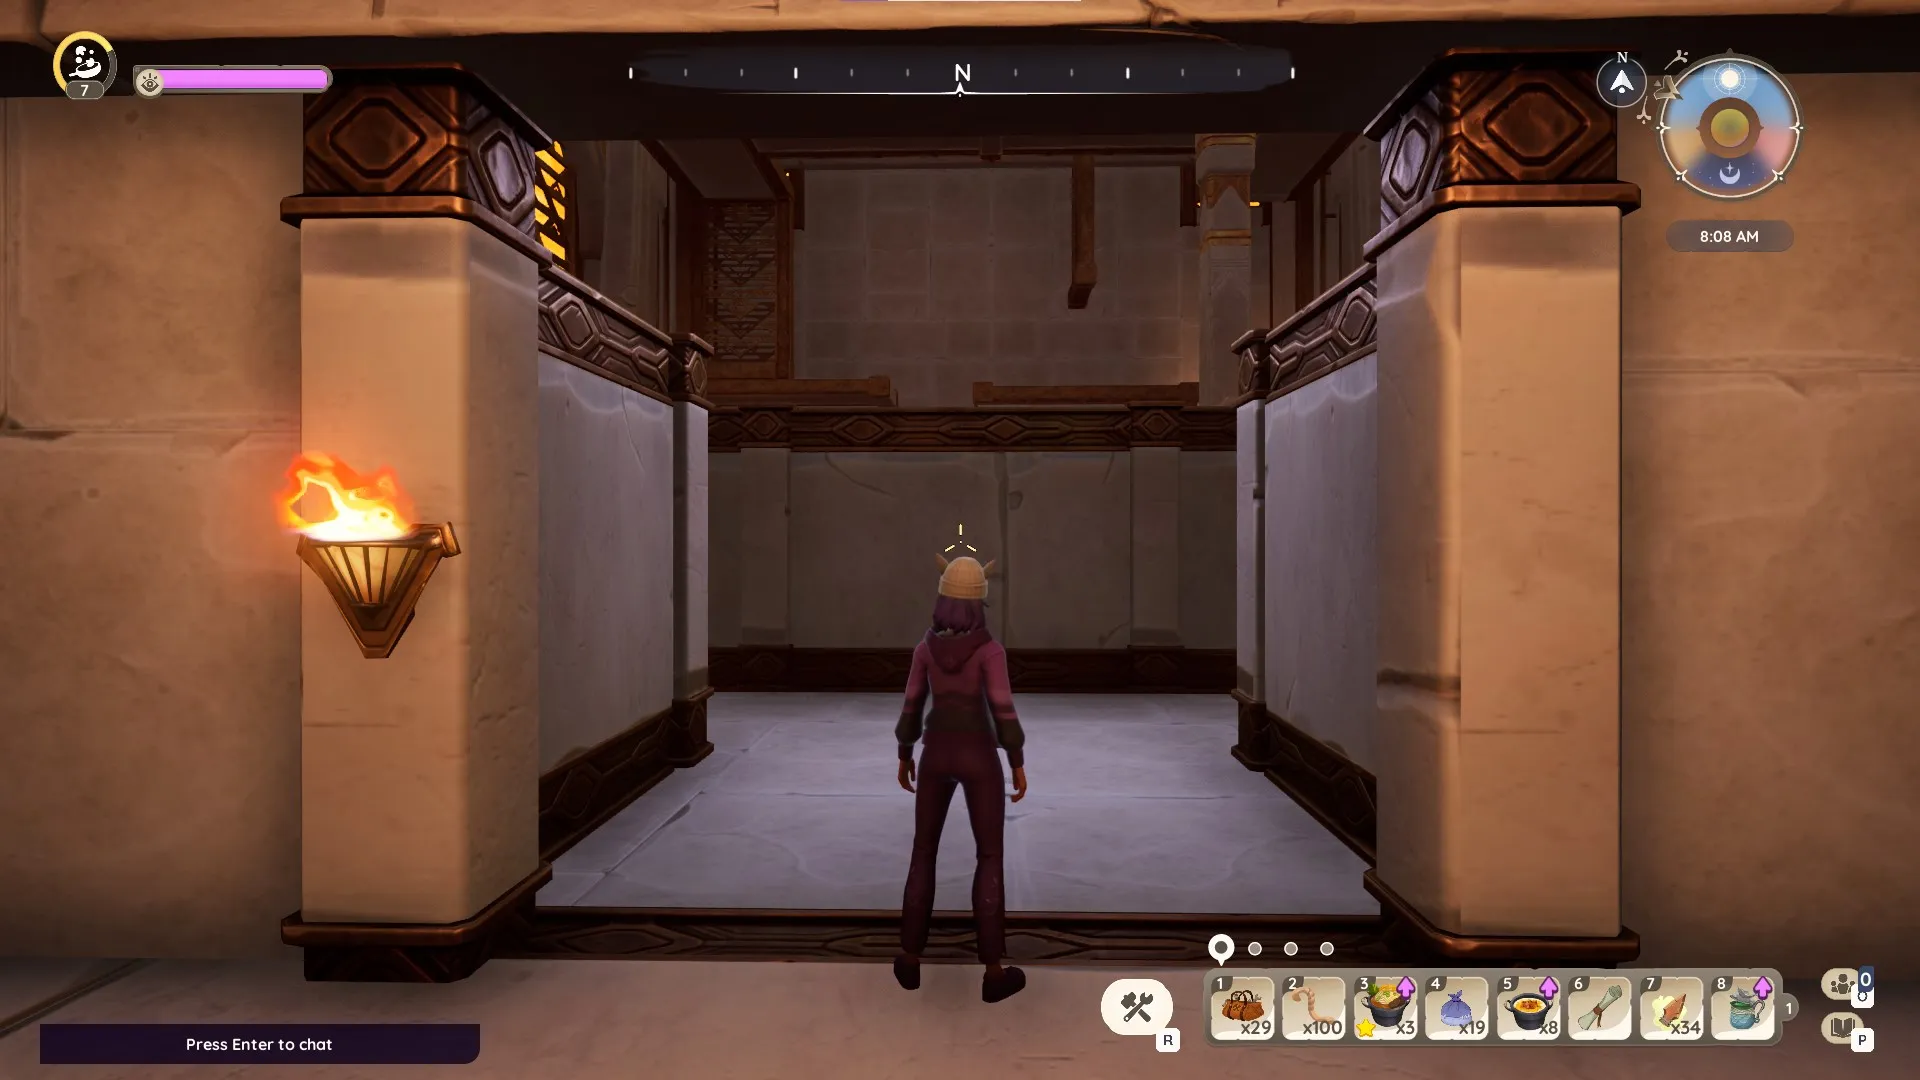 Palia Fire Temple avatar standing in the doorway to another maze room.